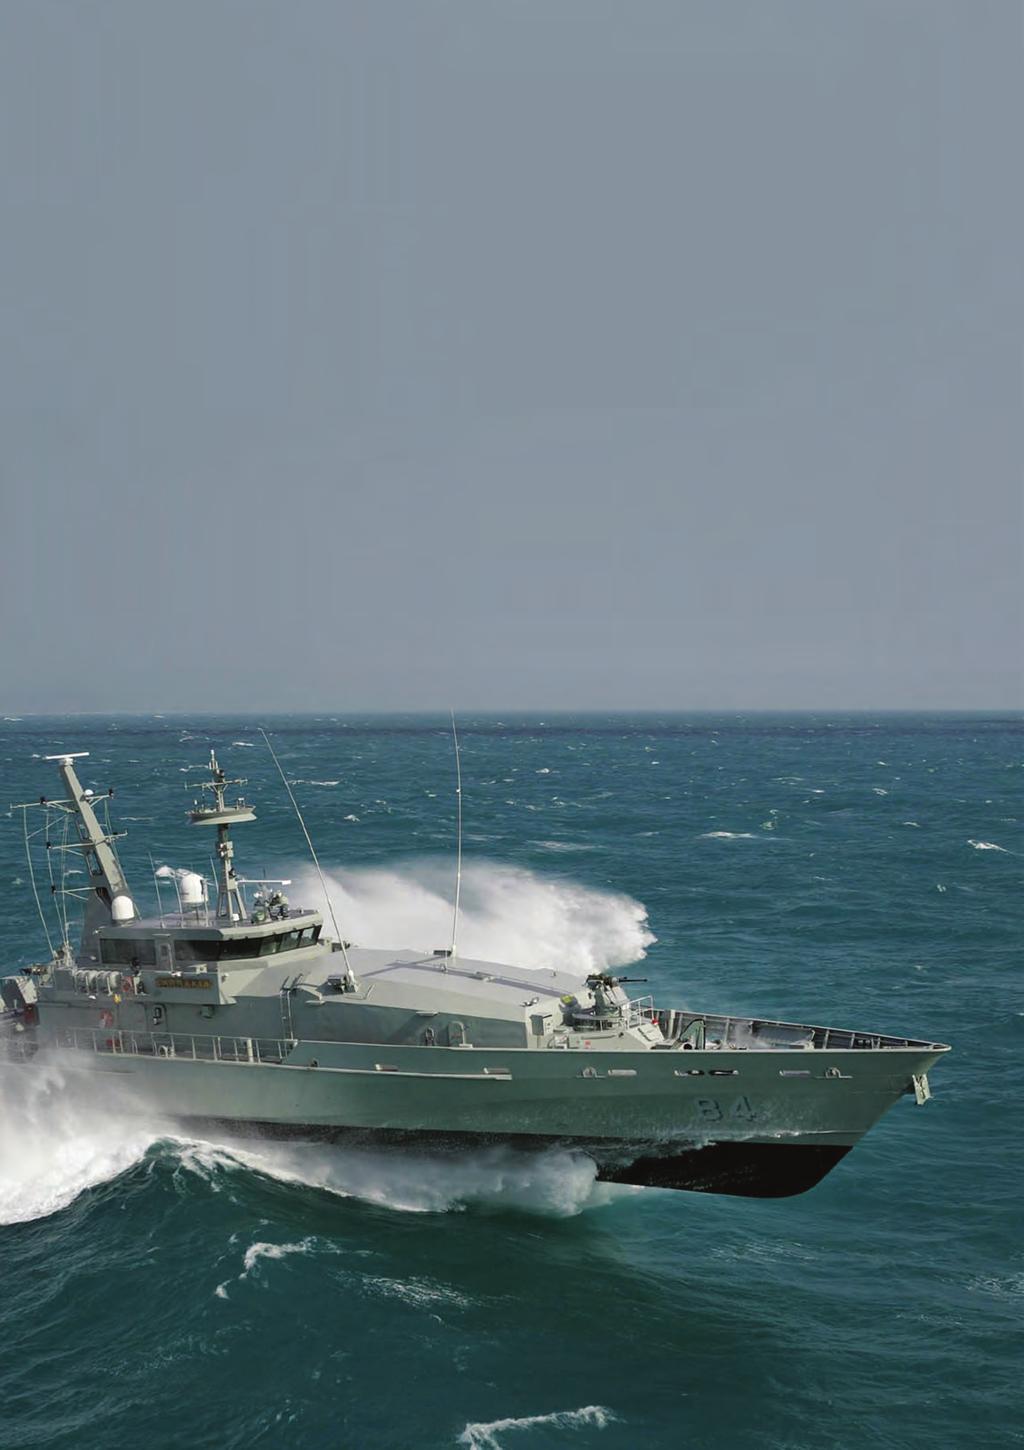 Defence Patrol boats and mine hunters spend a large proportion of their operational time at low speeds where traditional fin stabilizers do not work effectively.